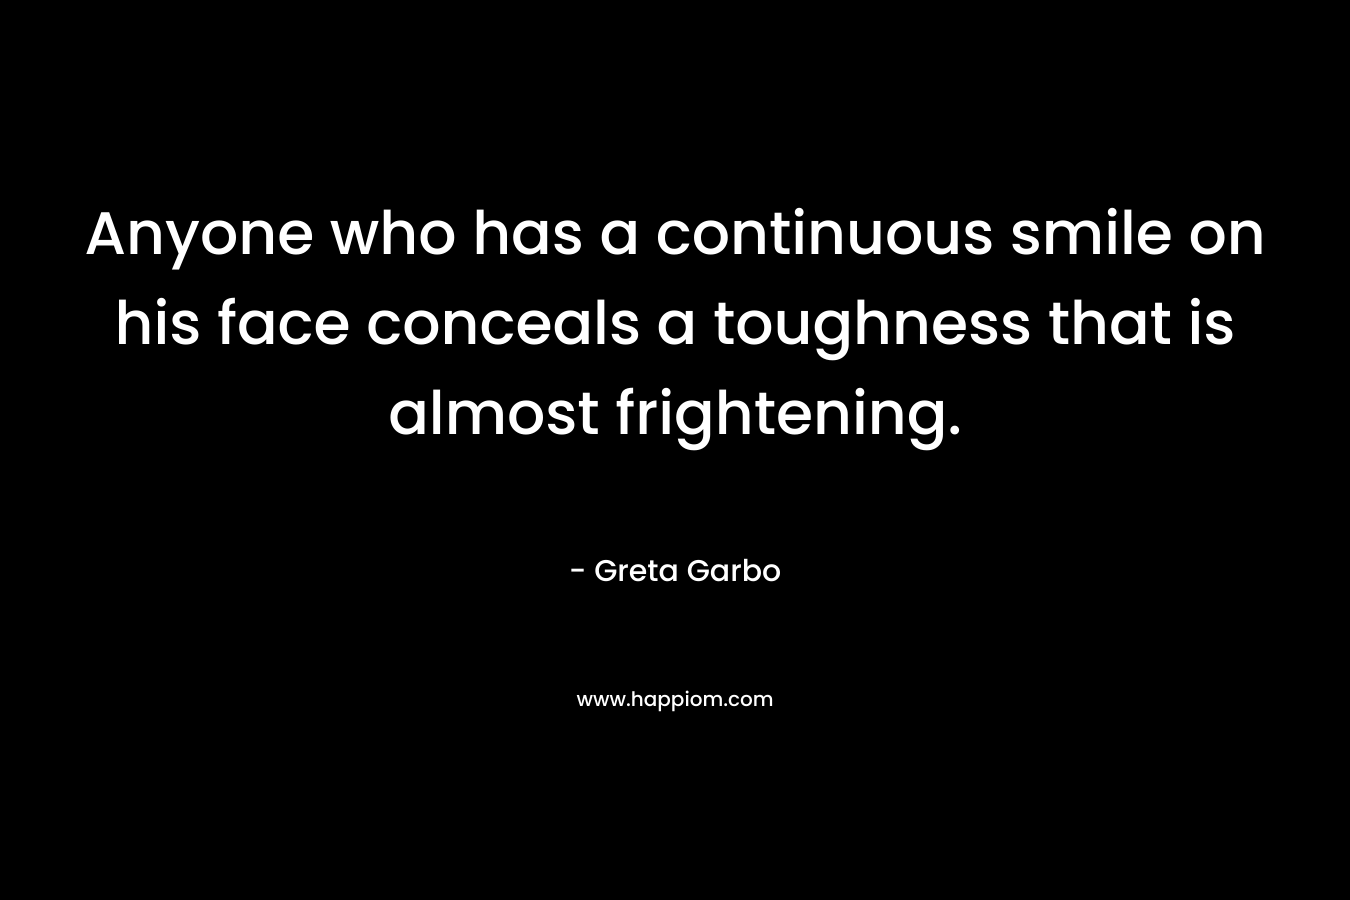 Anyone who has a continuous smile on his face conceals a toughness that is almost frightening. – Greta Garbo